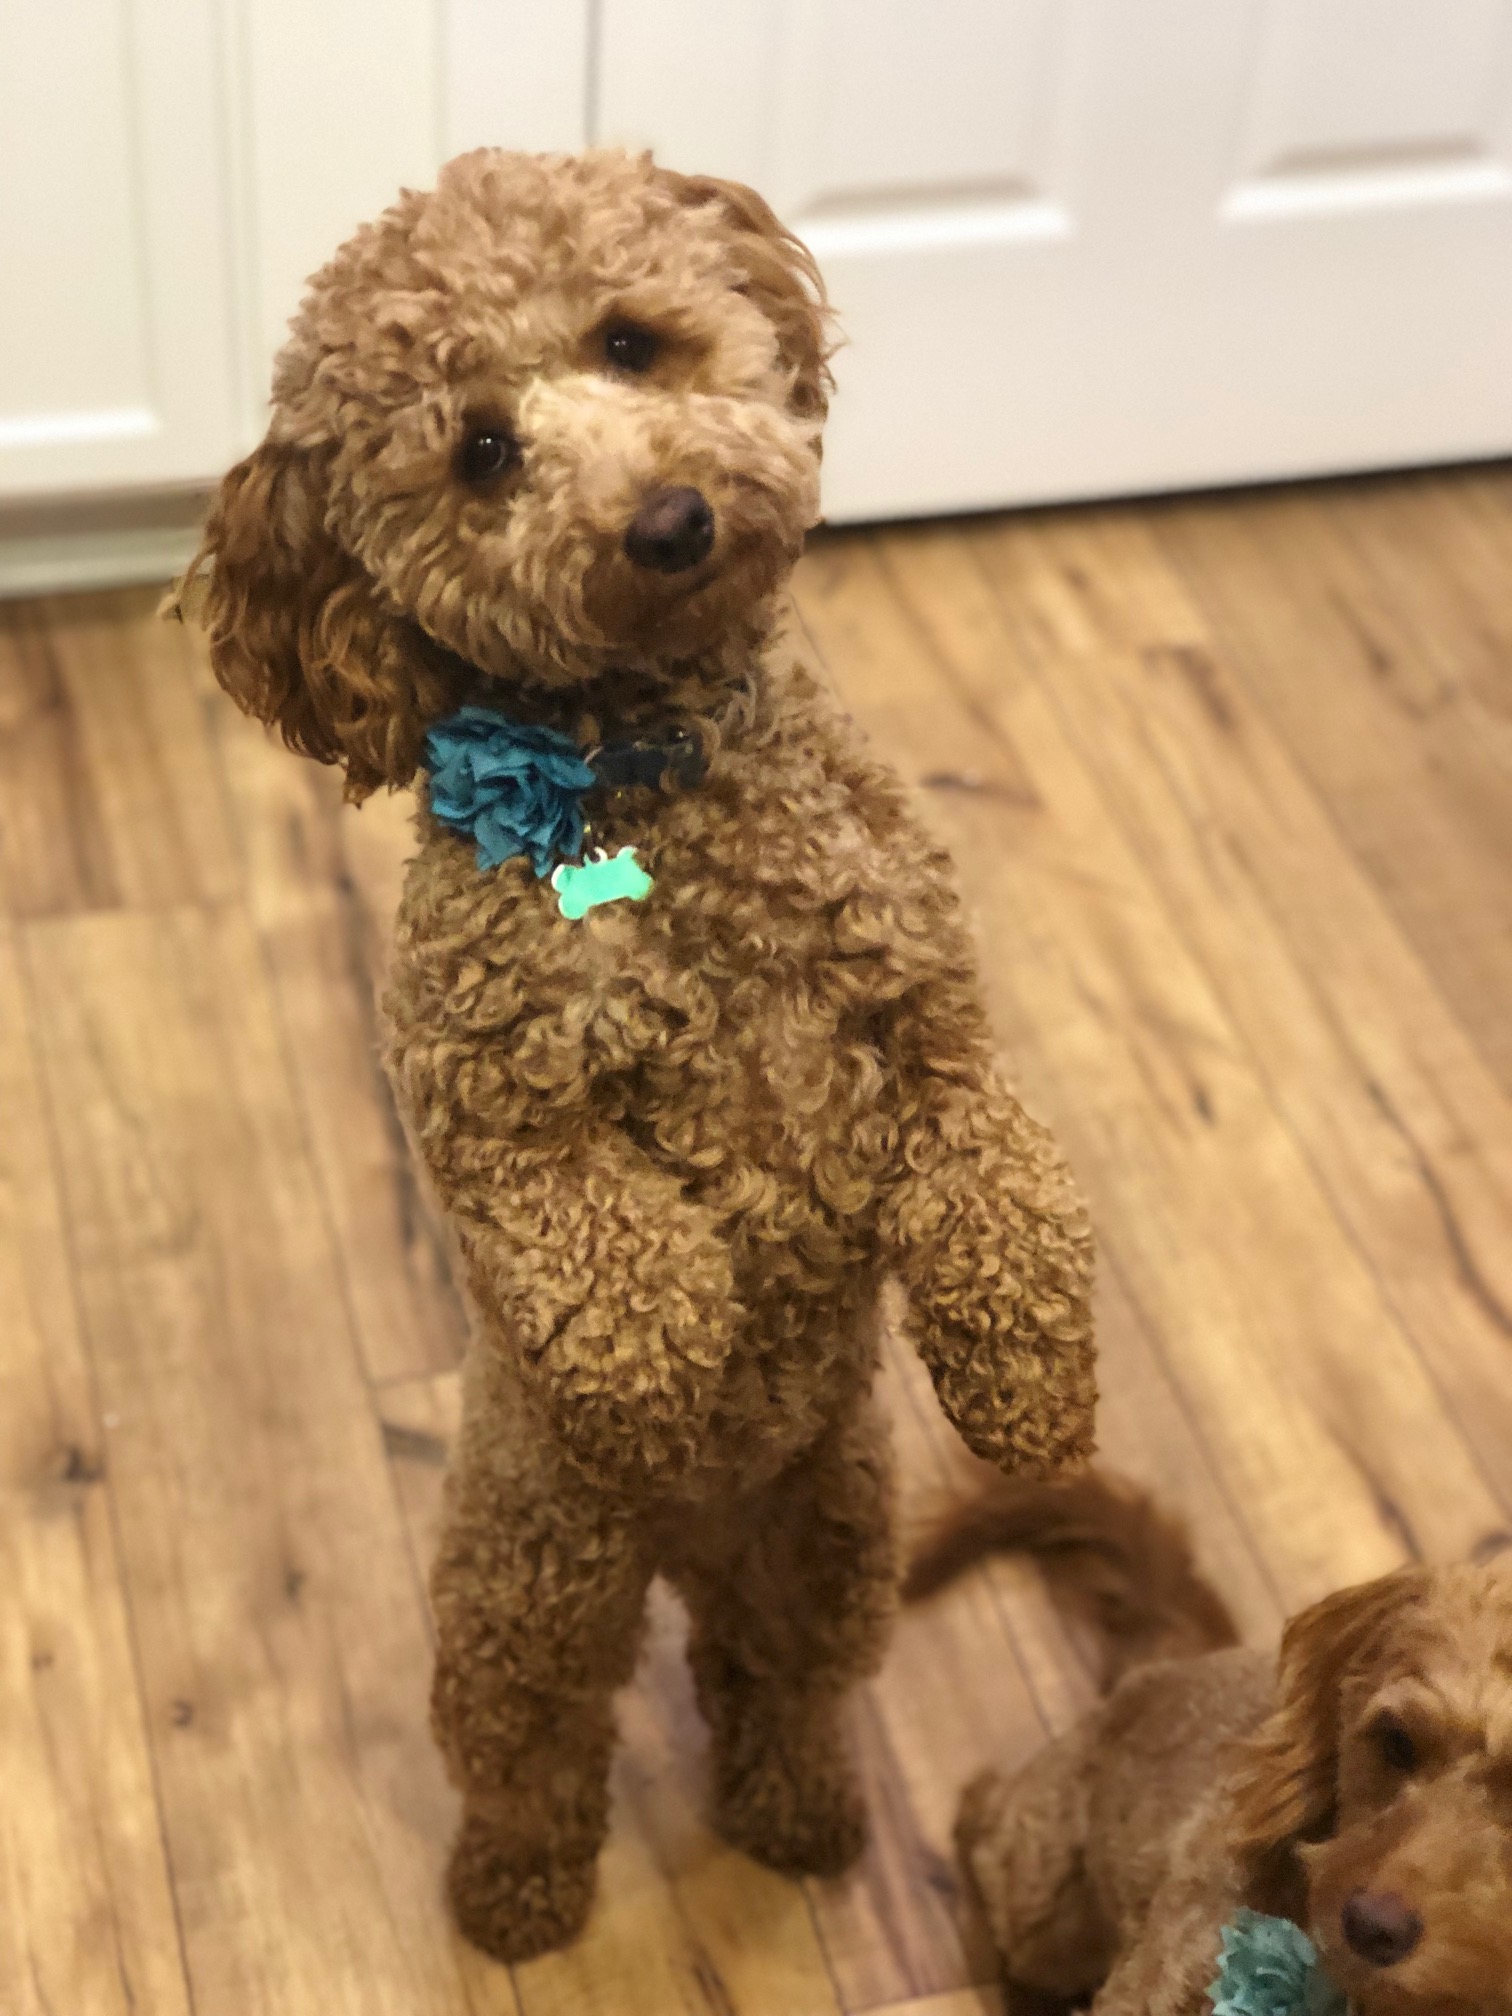 Two brown poodle dogs, with their hind legs upright, stand side by side, displaying their elegant posture.